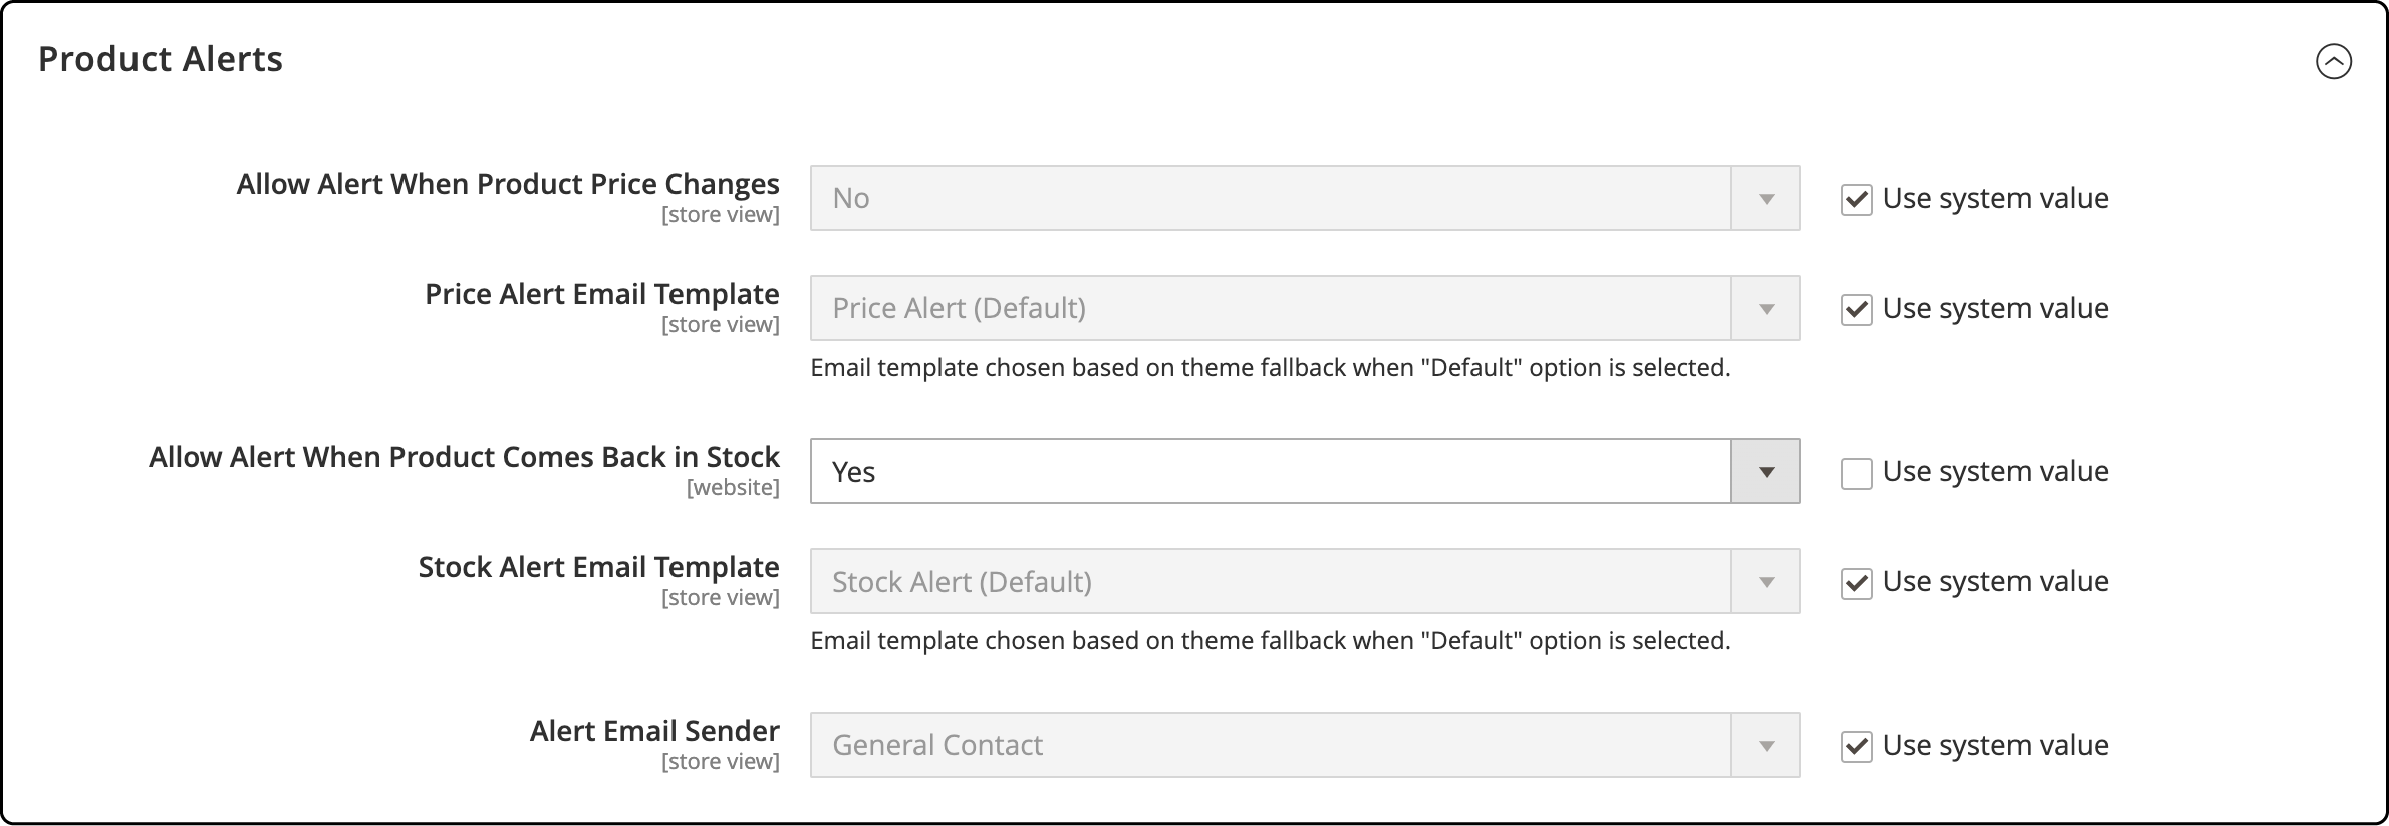 Guide on Setting Up Product Alerts in Magento 2 for Customer Engagement